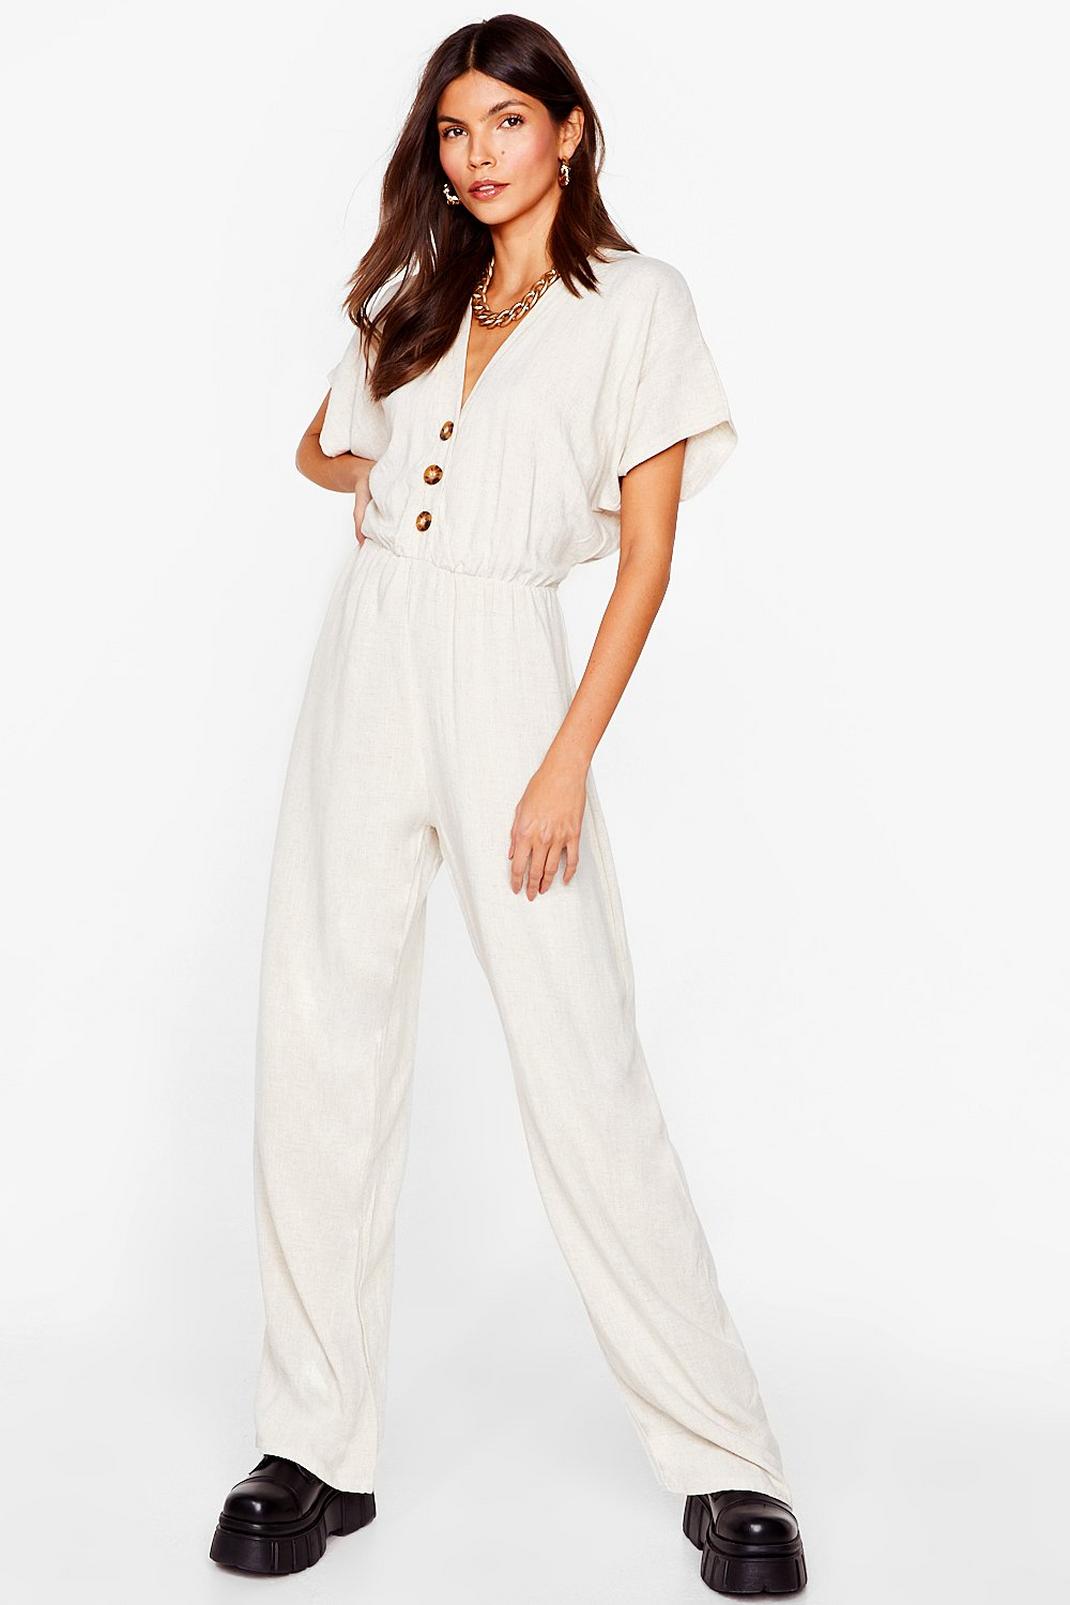 One Piece is All It Takes Linen Jumpsuit image number 1